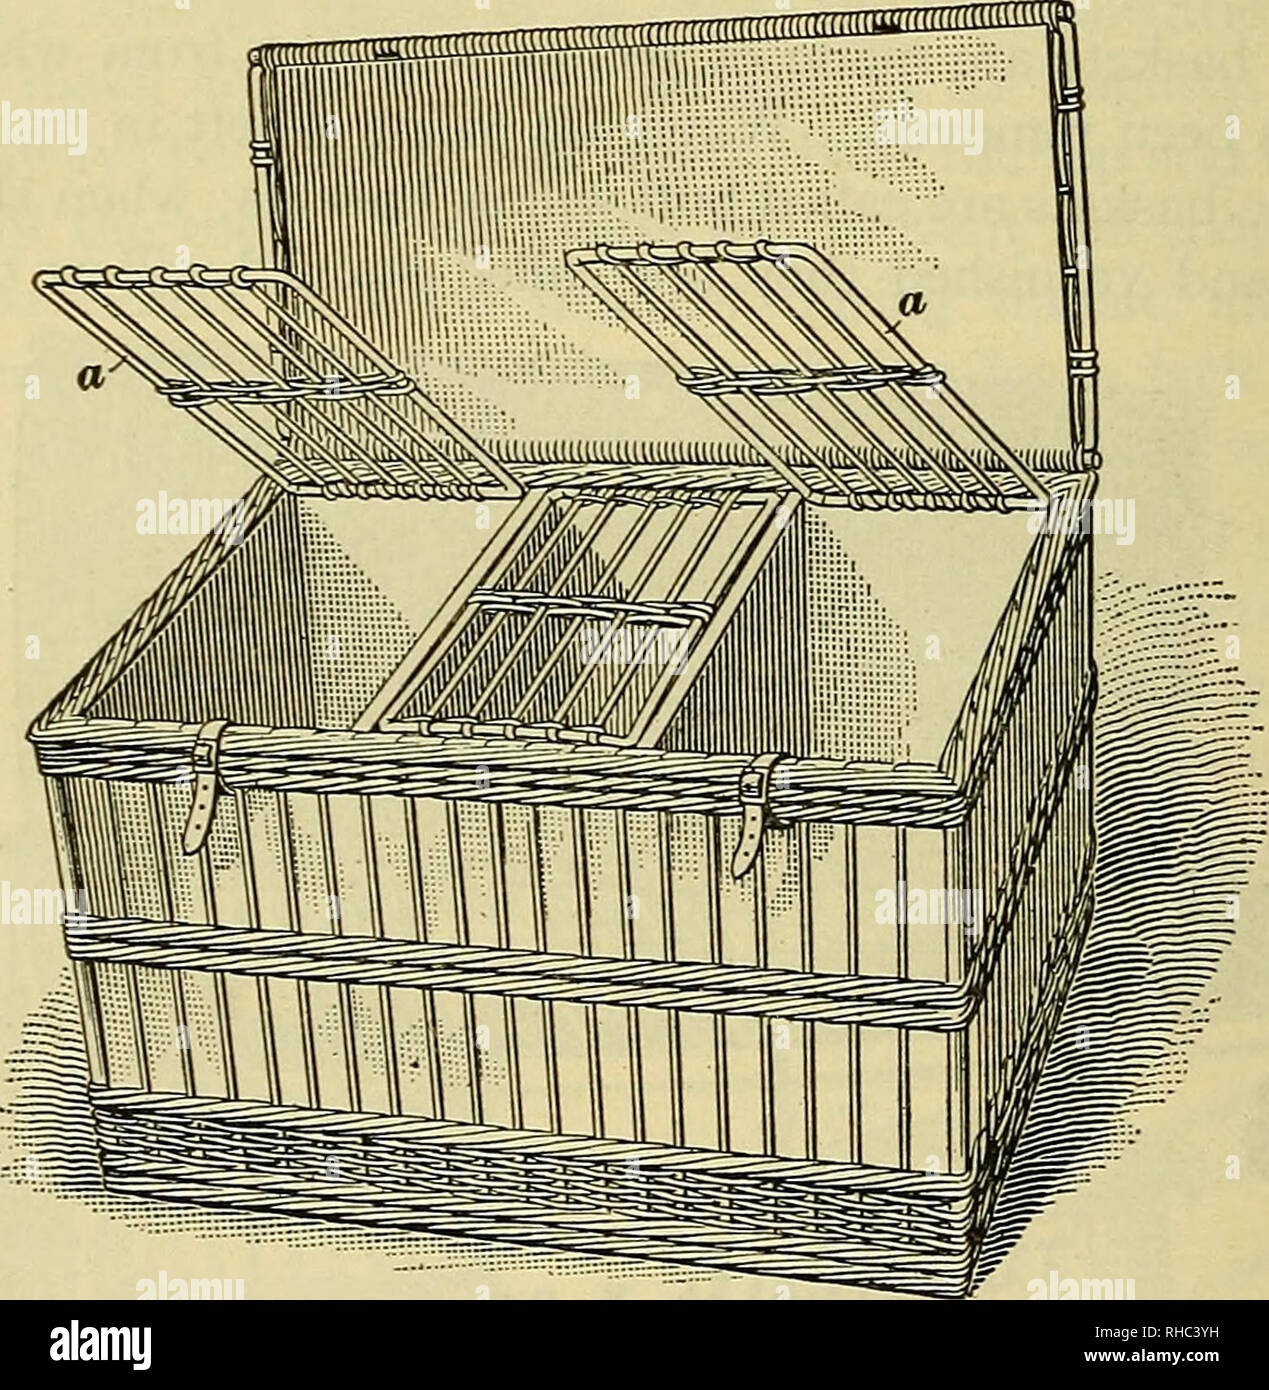 . The book of poultry. Poultry. 168 STANDARD-BRED POULTRY MANAGEMENT § 3 Fig. 7. Fine-woven baskets are also used for pigeons. The basket shown in Fig. 6 is divided into four compartments a, each of which is 12 inches long, 9 inches wide, and 12 inches deep. The outside measurements of the basket are: 38| inches long, 14| inches wide at the top, and 13 inches wide at the bot- tom, and 14^ inches deep. Each of the compartments has a separate lid a under the main lid of the basket and can be opened independently of the main Hd, in order that the fowls may be removed one at a time without danger  Stock Photo